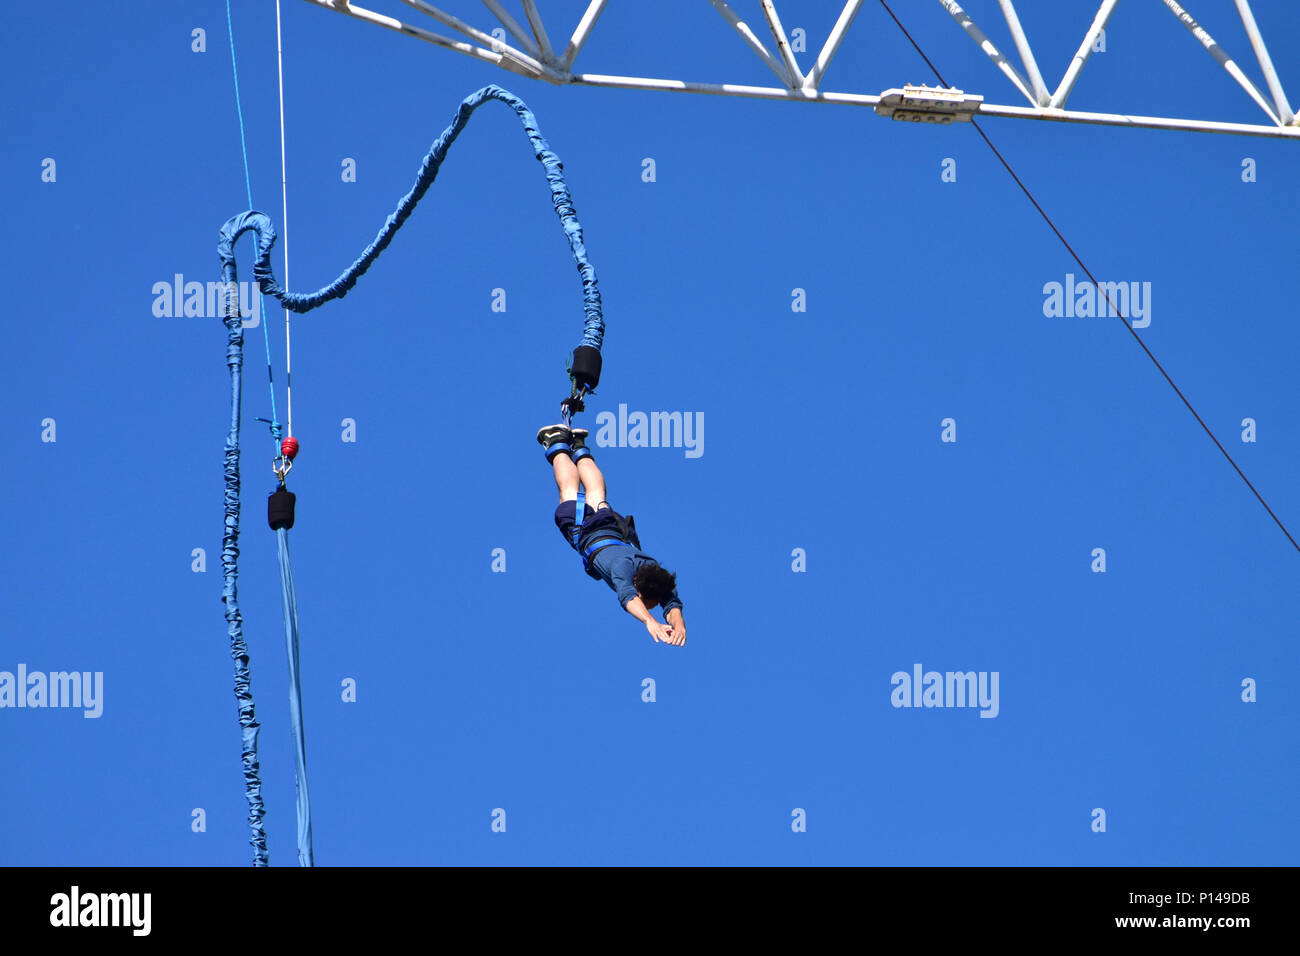 Bungee jumping on a sunny day Stock Photo